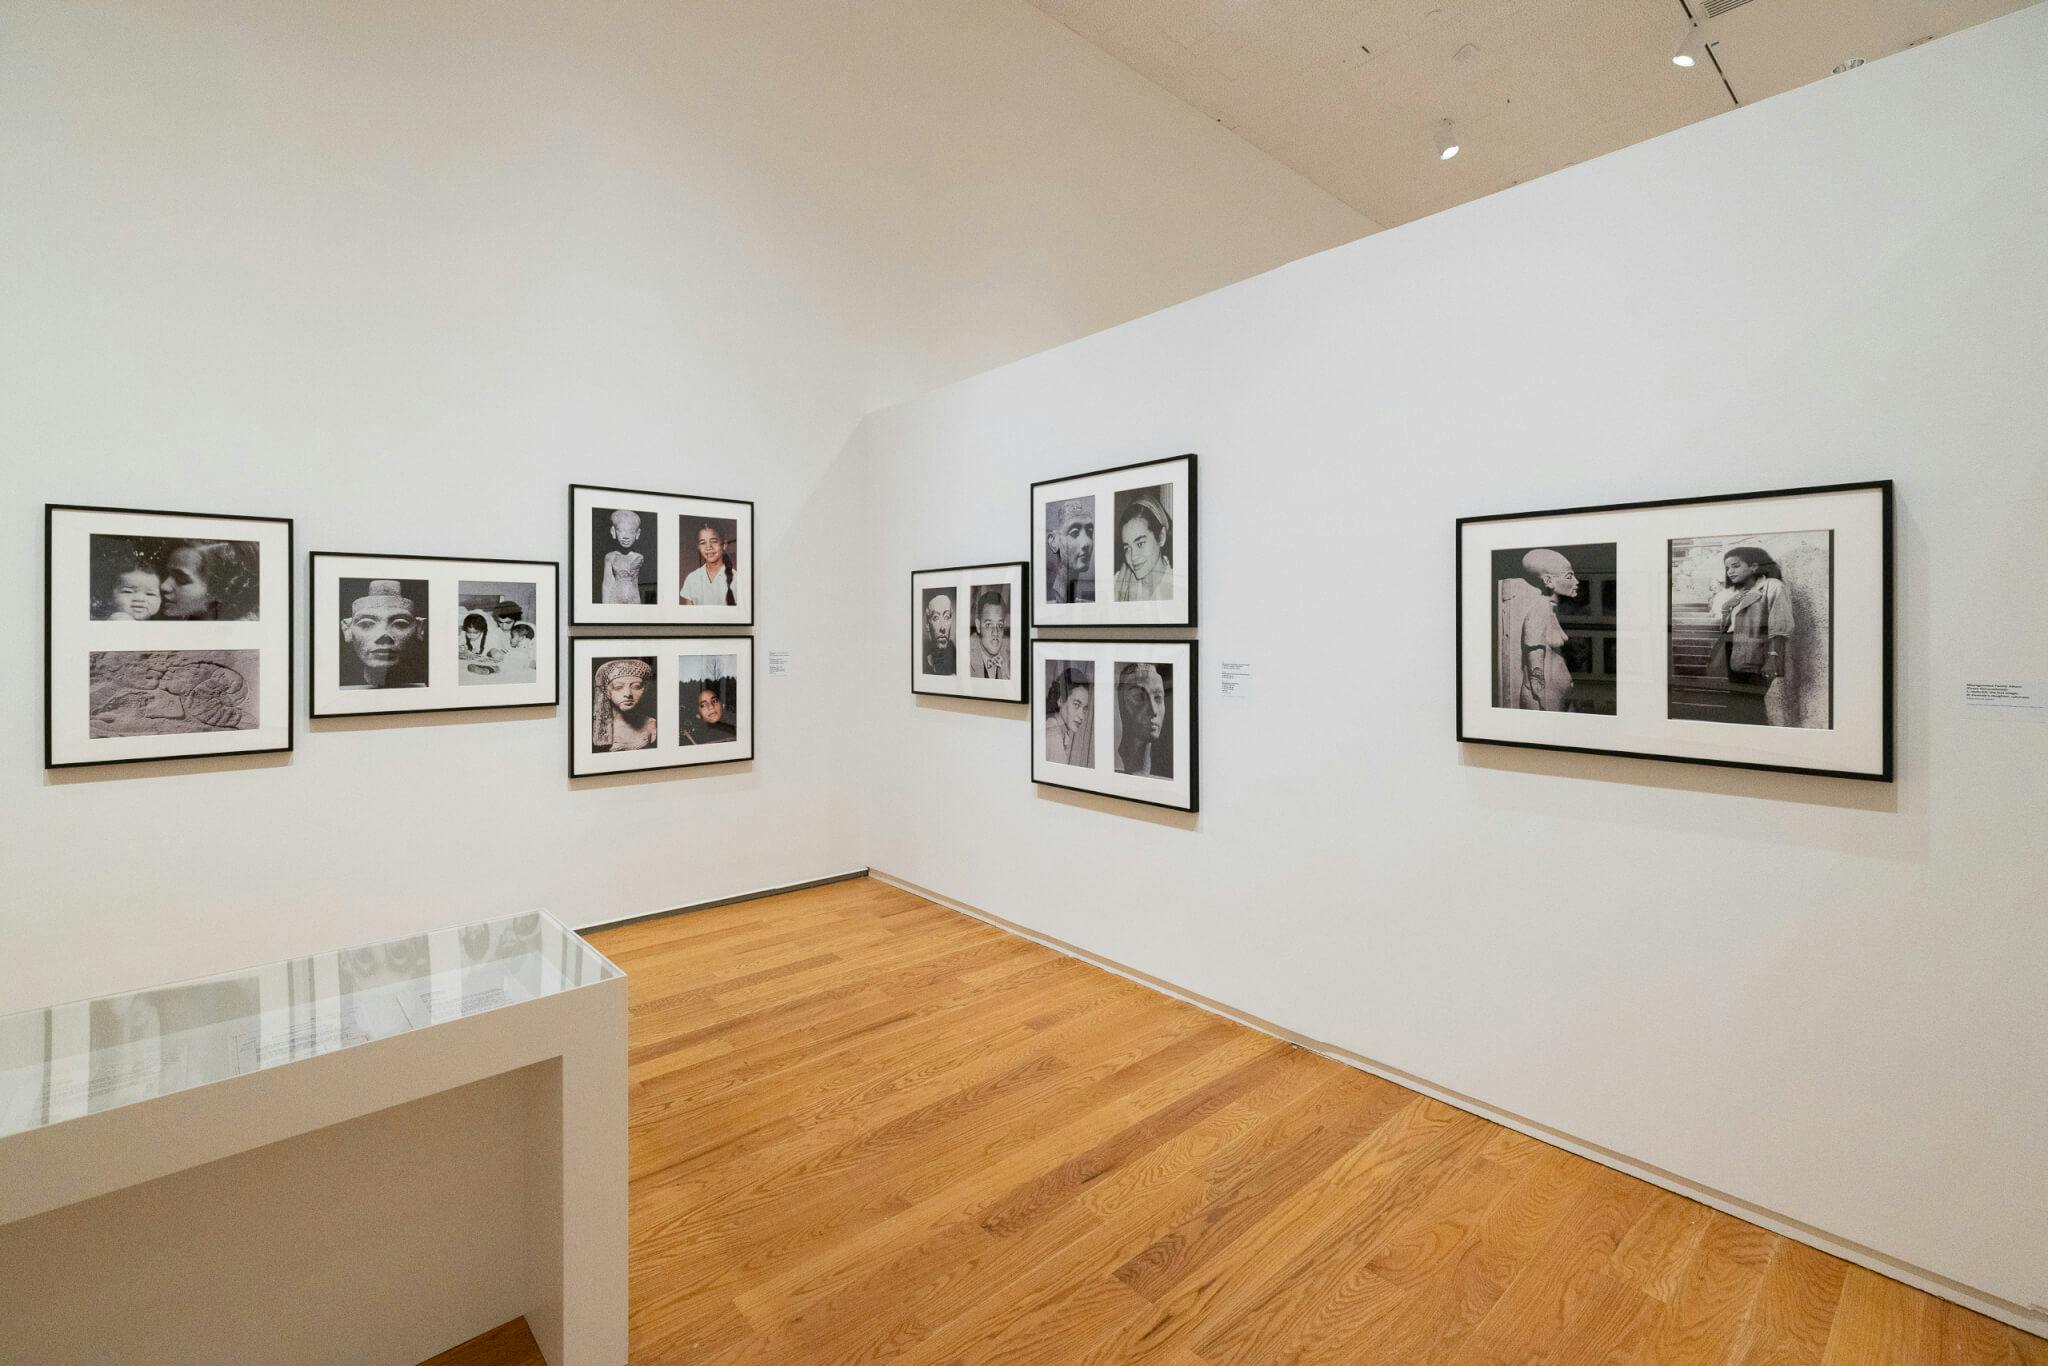 Photographs by Lorraine O'Grady adorn the white walls of a gallery.